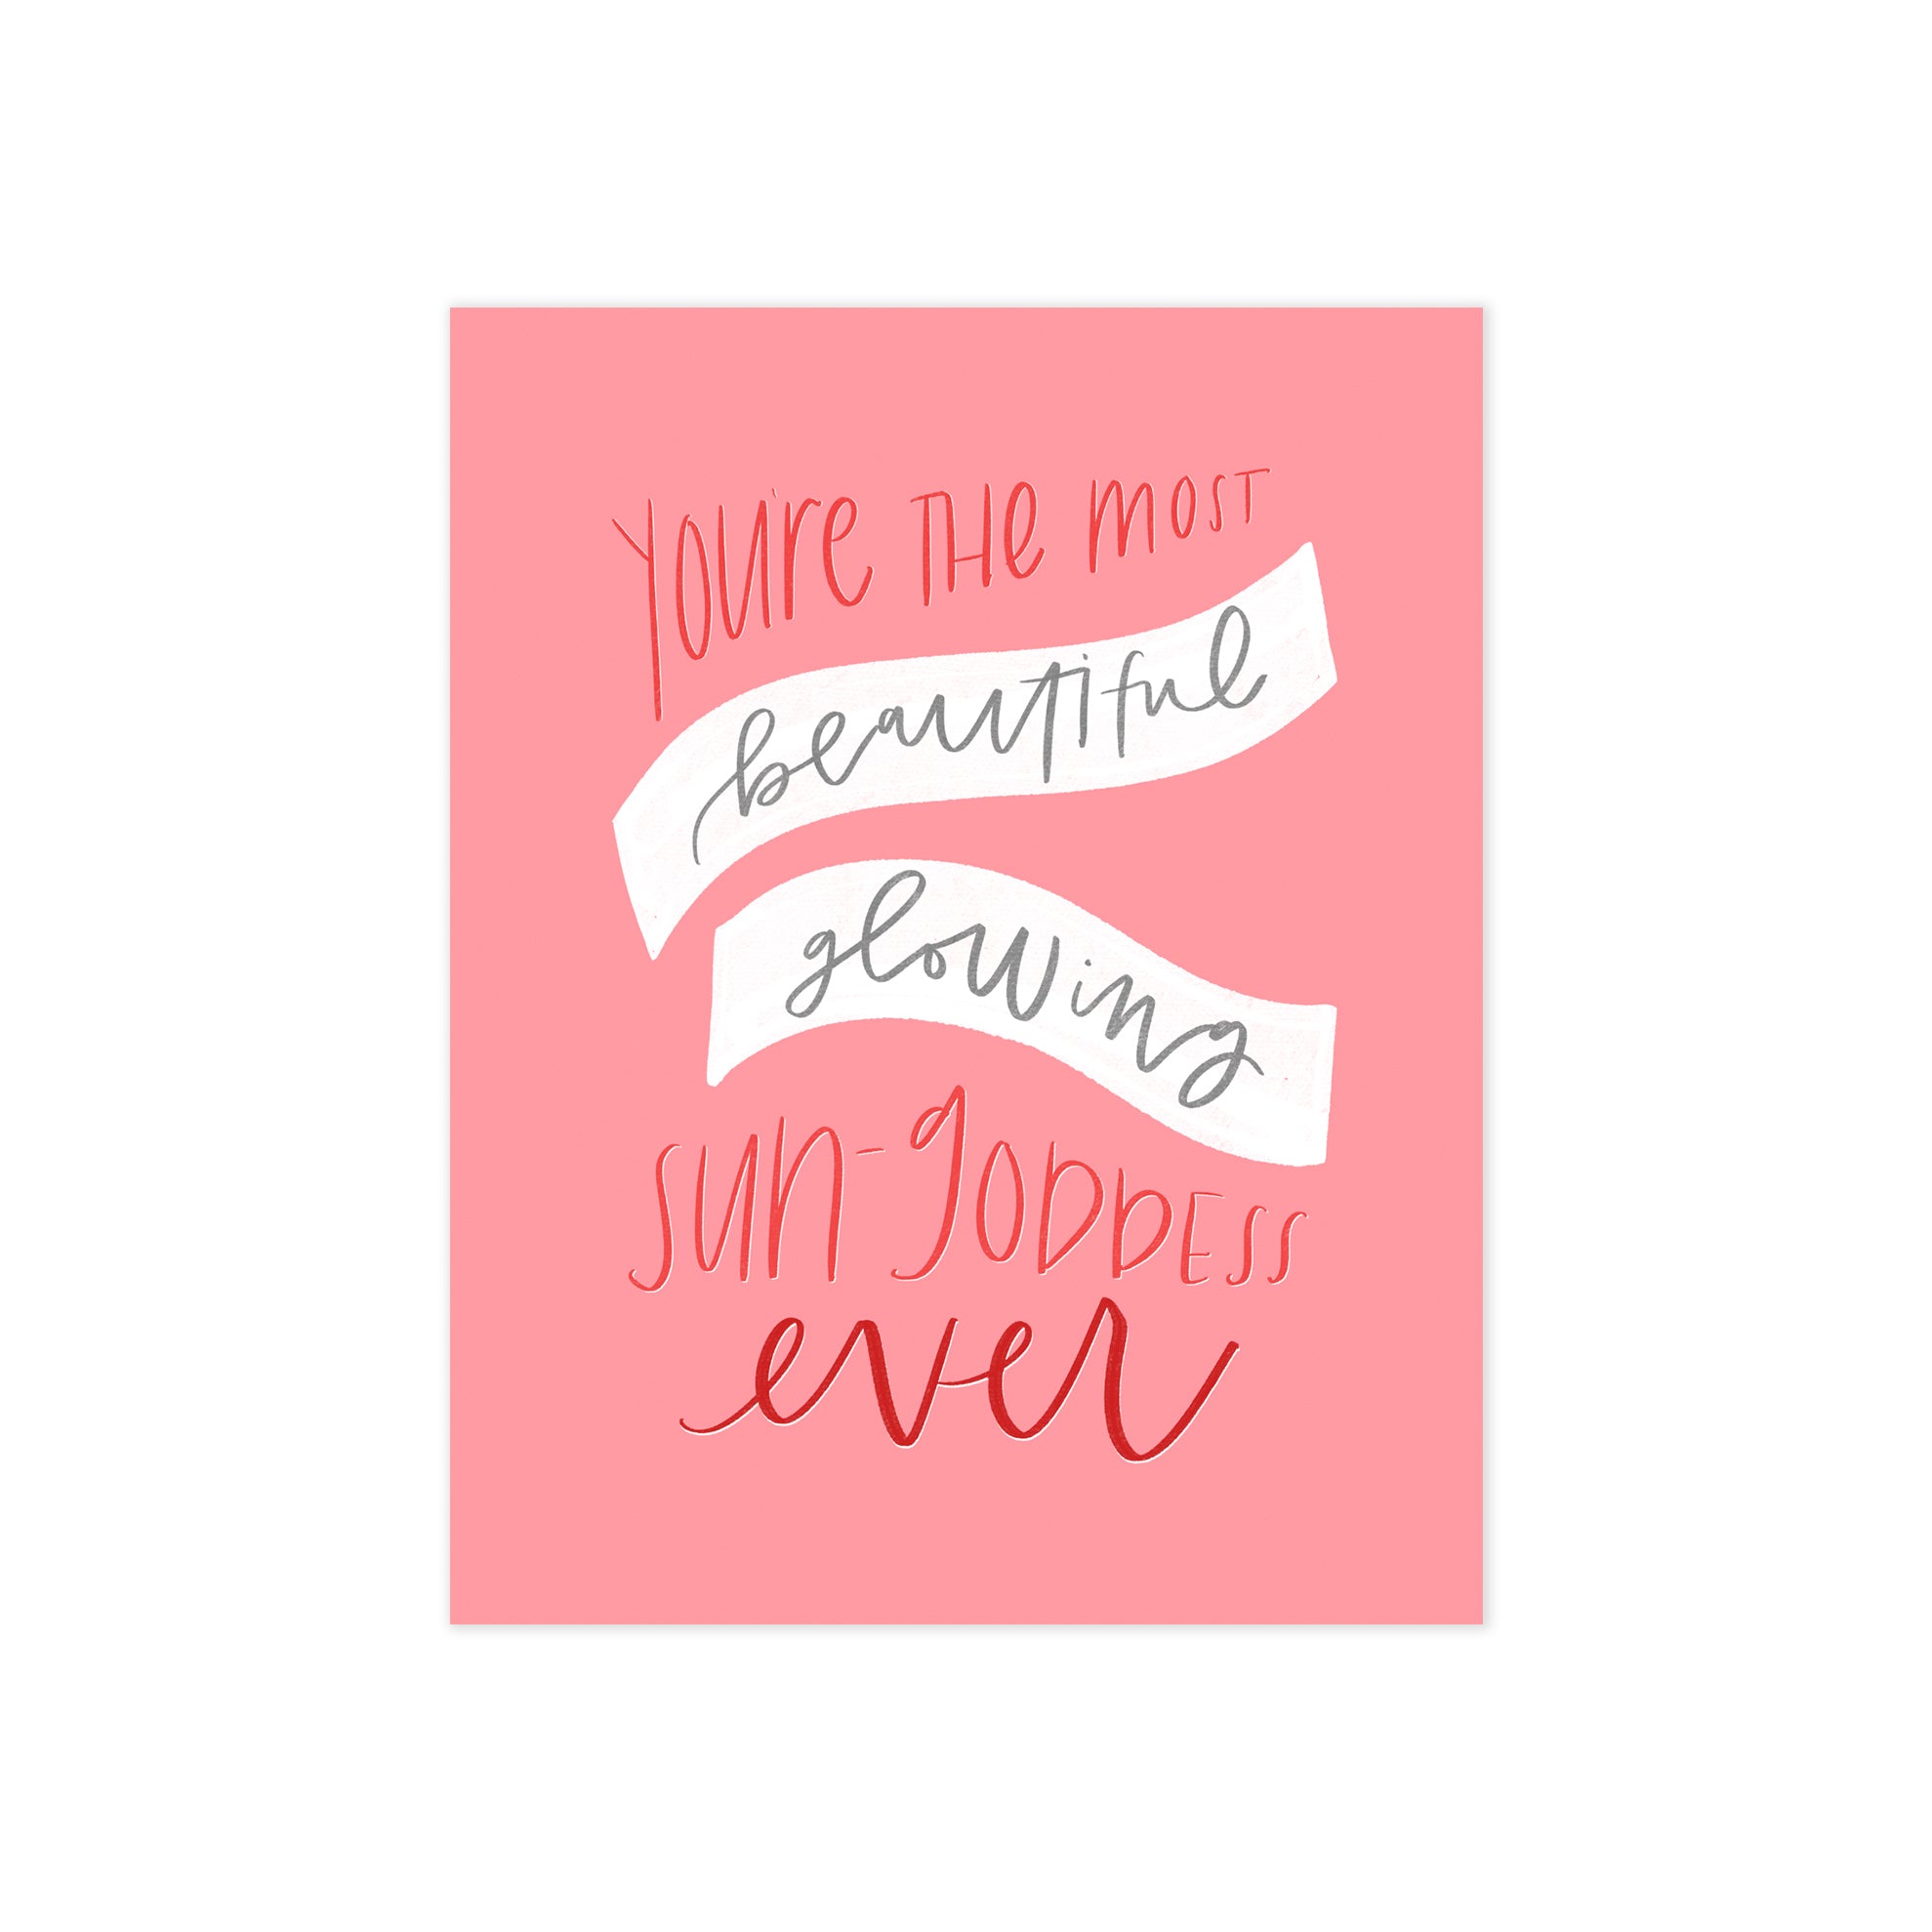 oh joyful day greeting card dark pink background with hand lettering of you're the most beautiful, glowing sun-goddess ever in red lettering with with banners